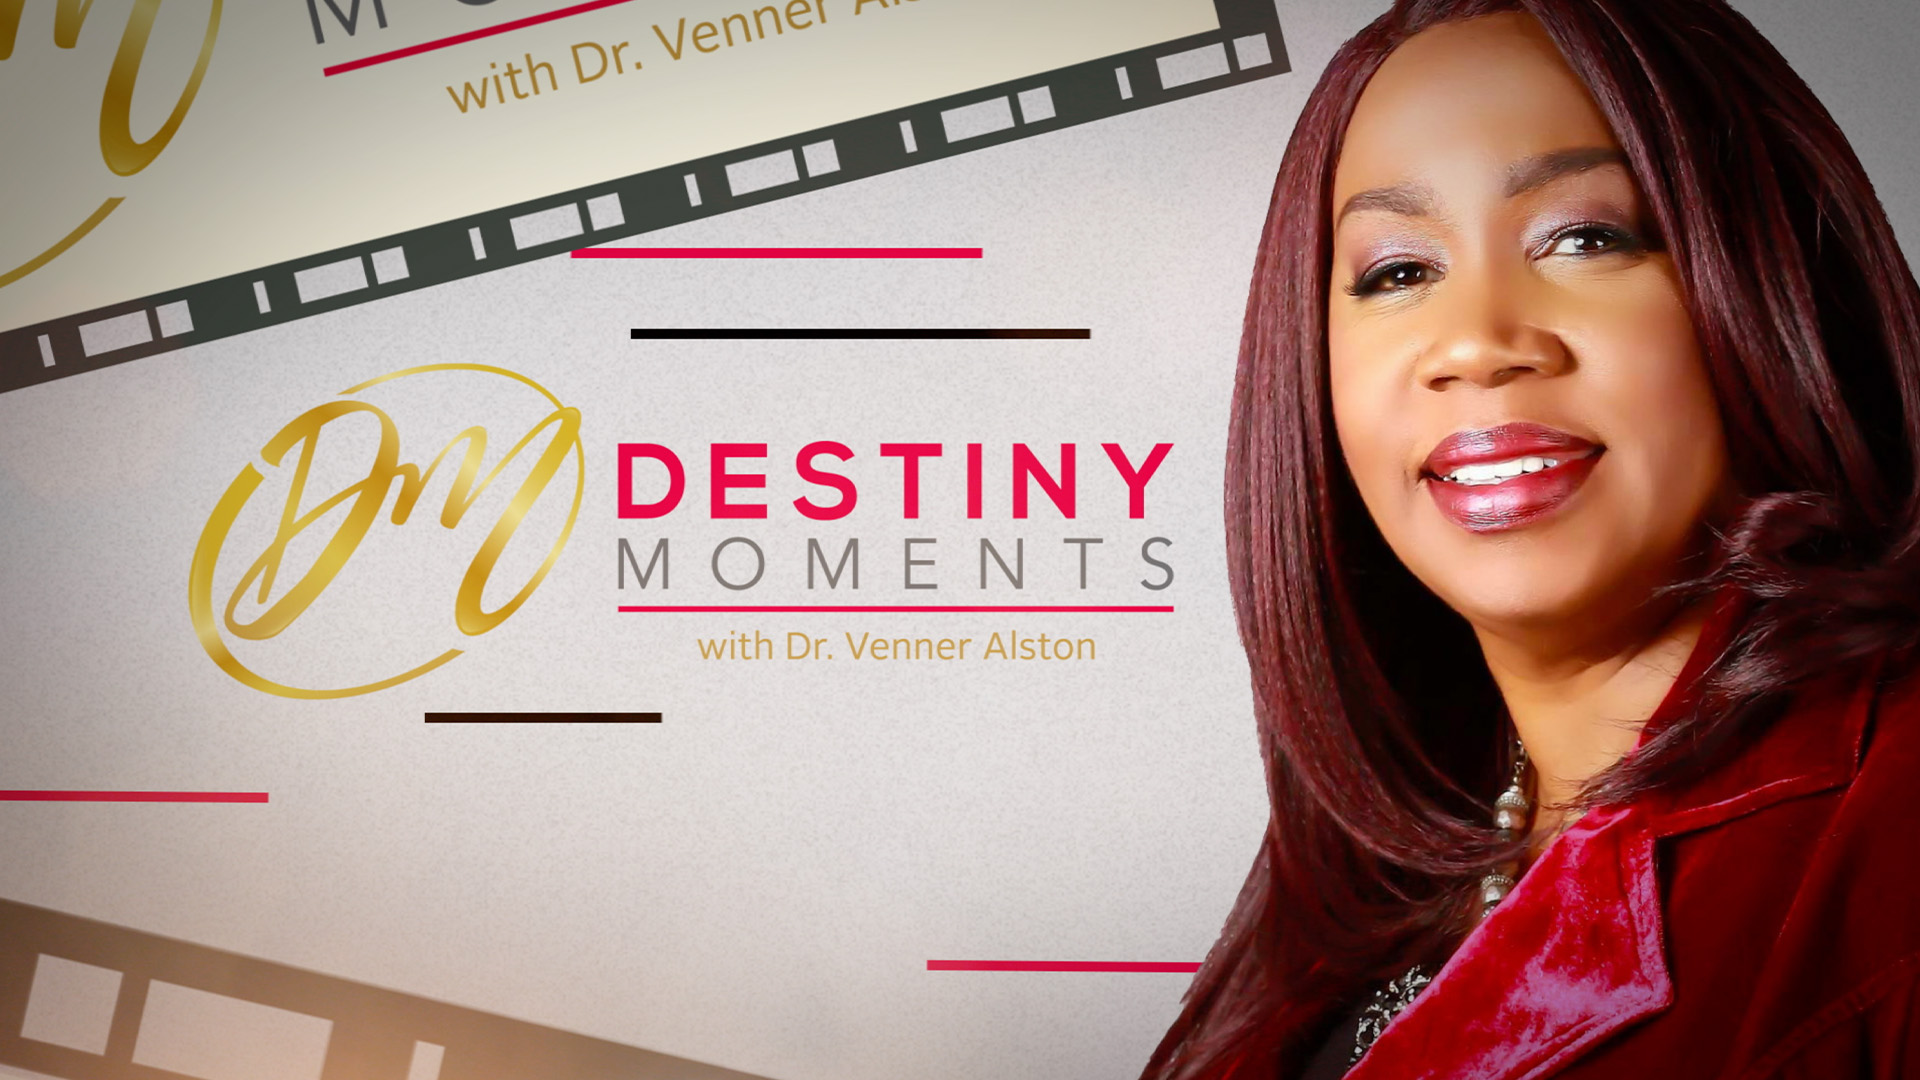 Destiny Moments with Dr. Venner Alston